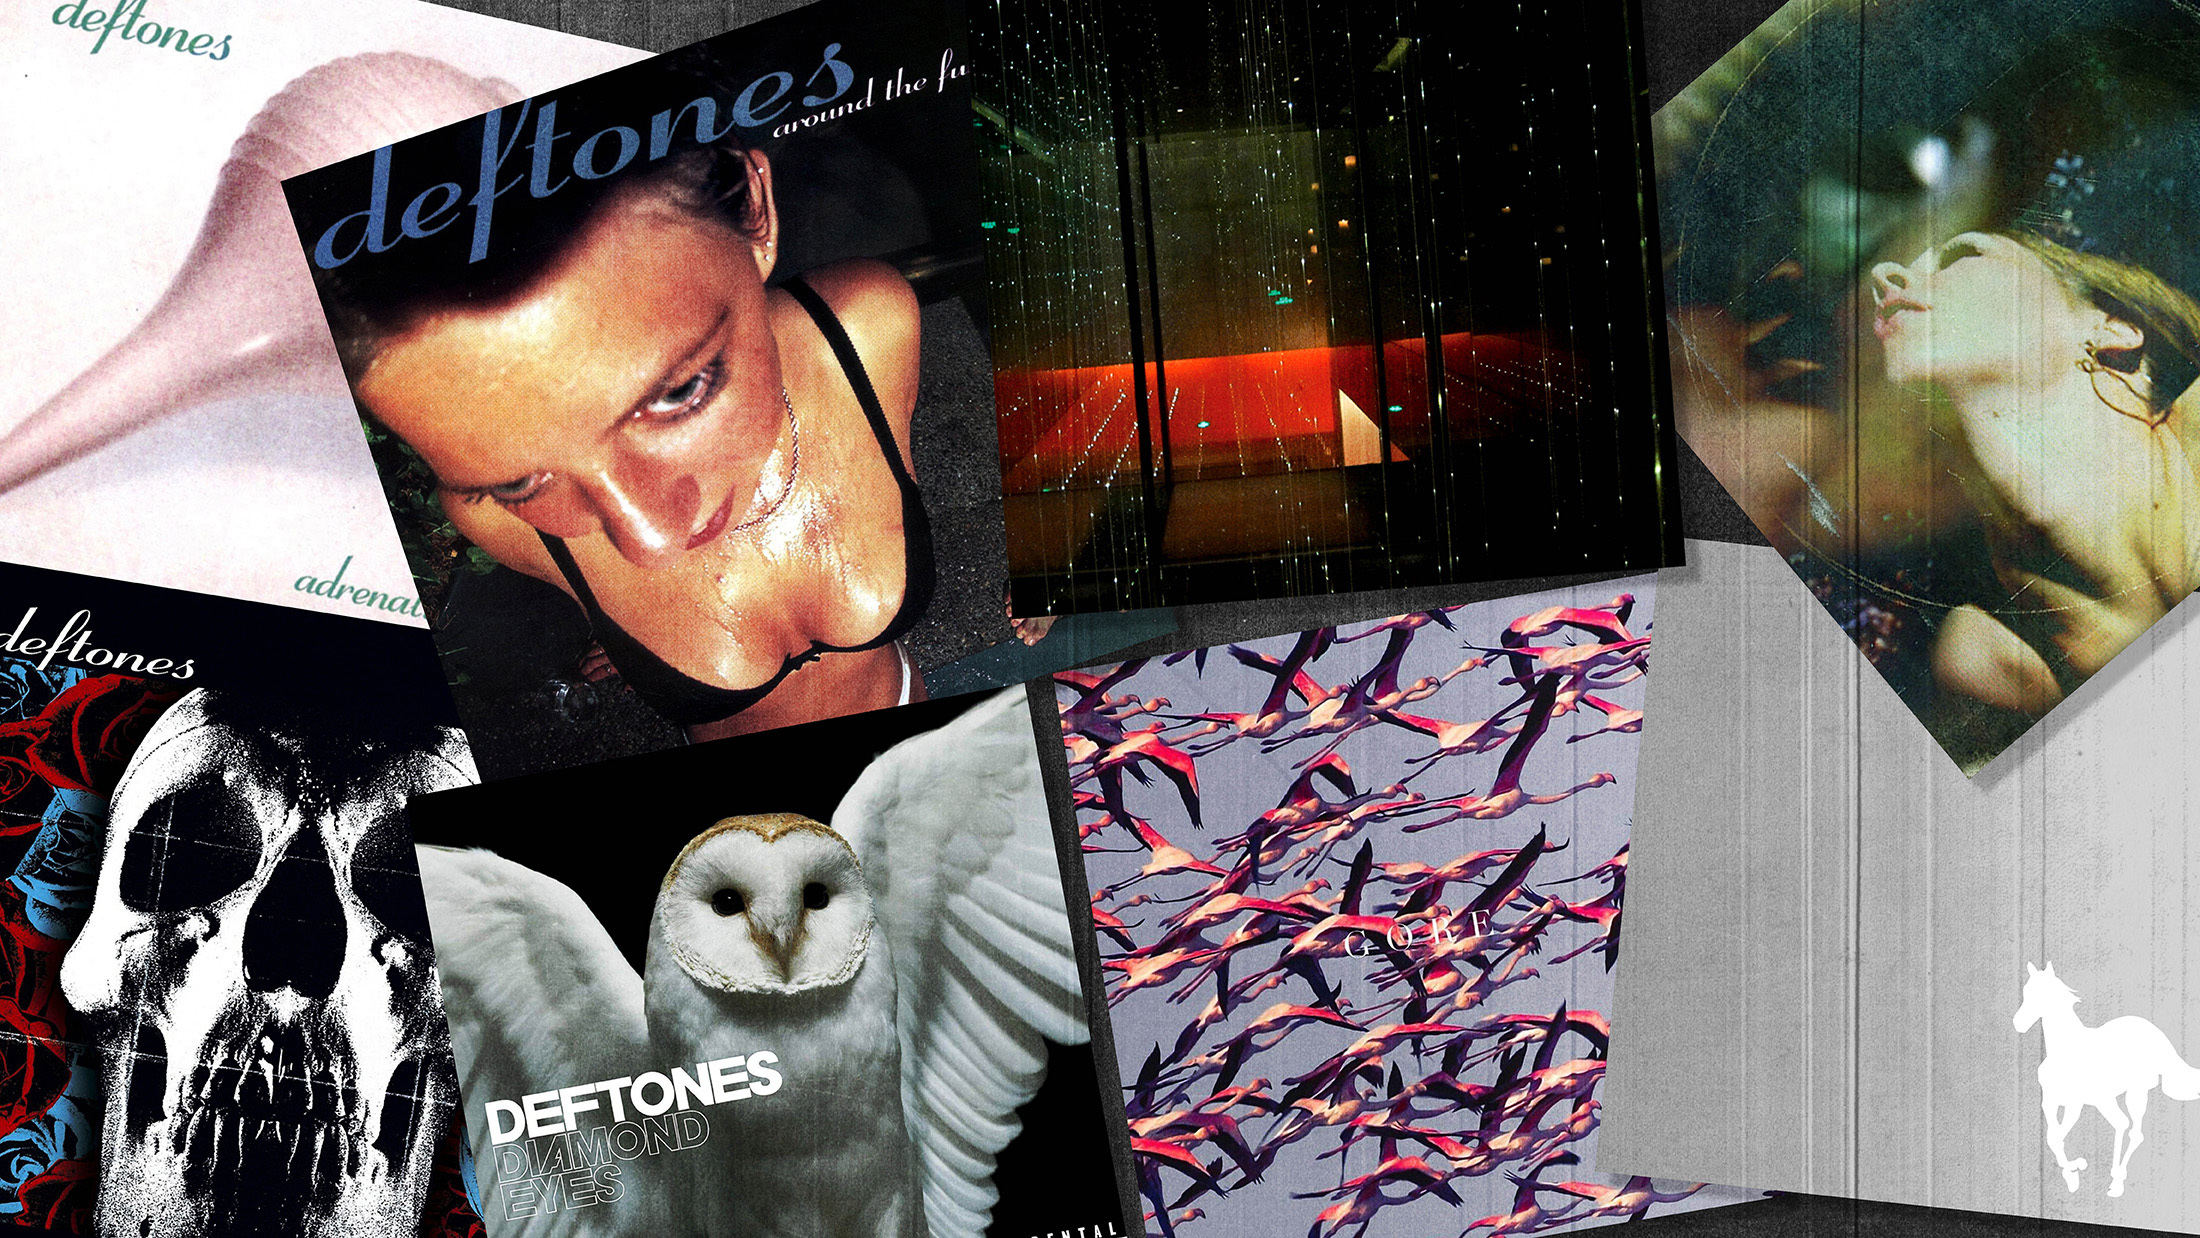 when is the new deftones albums coming out 2019